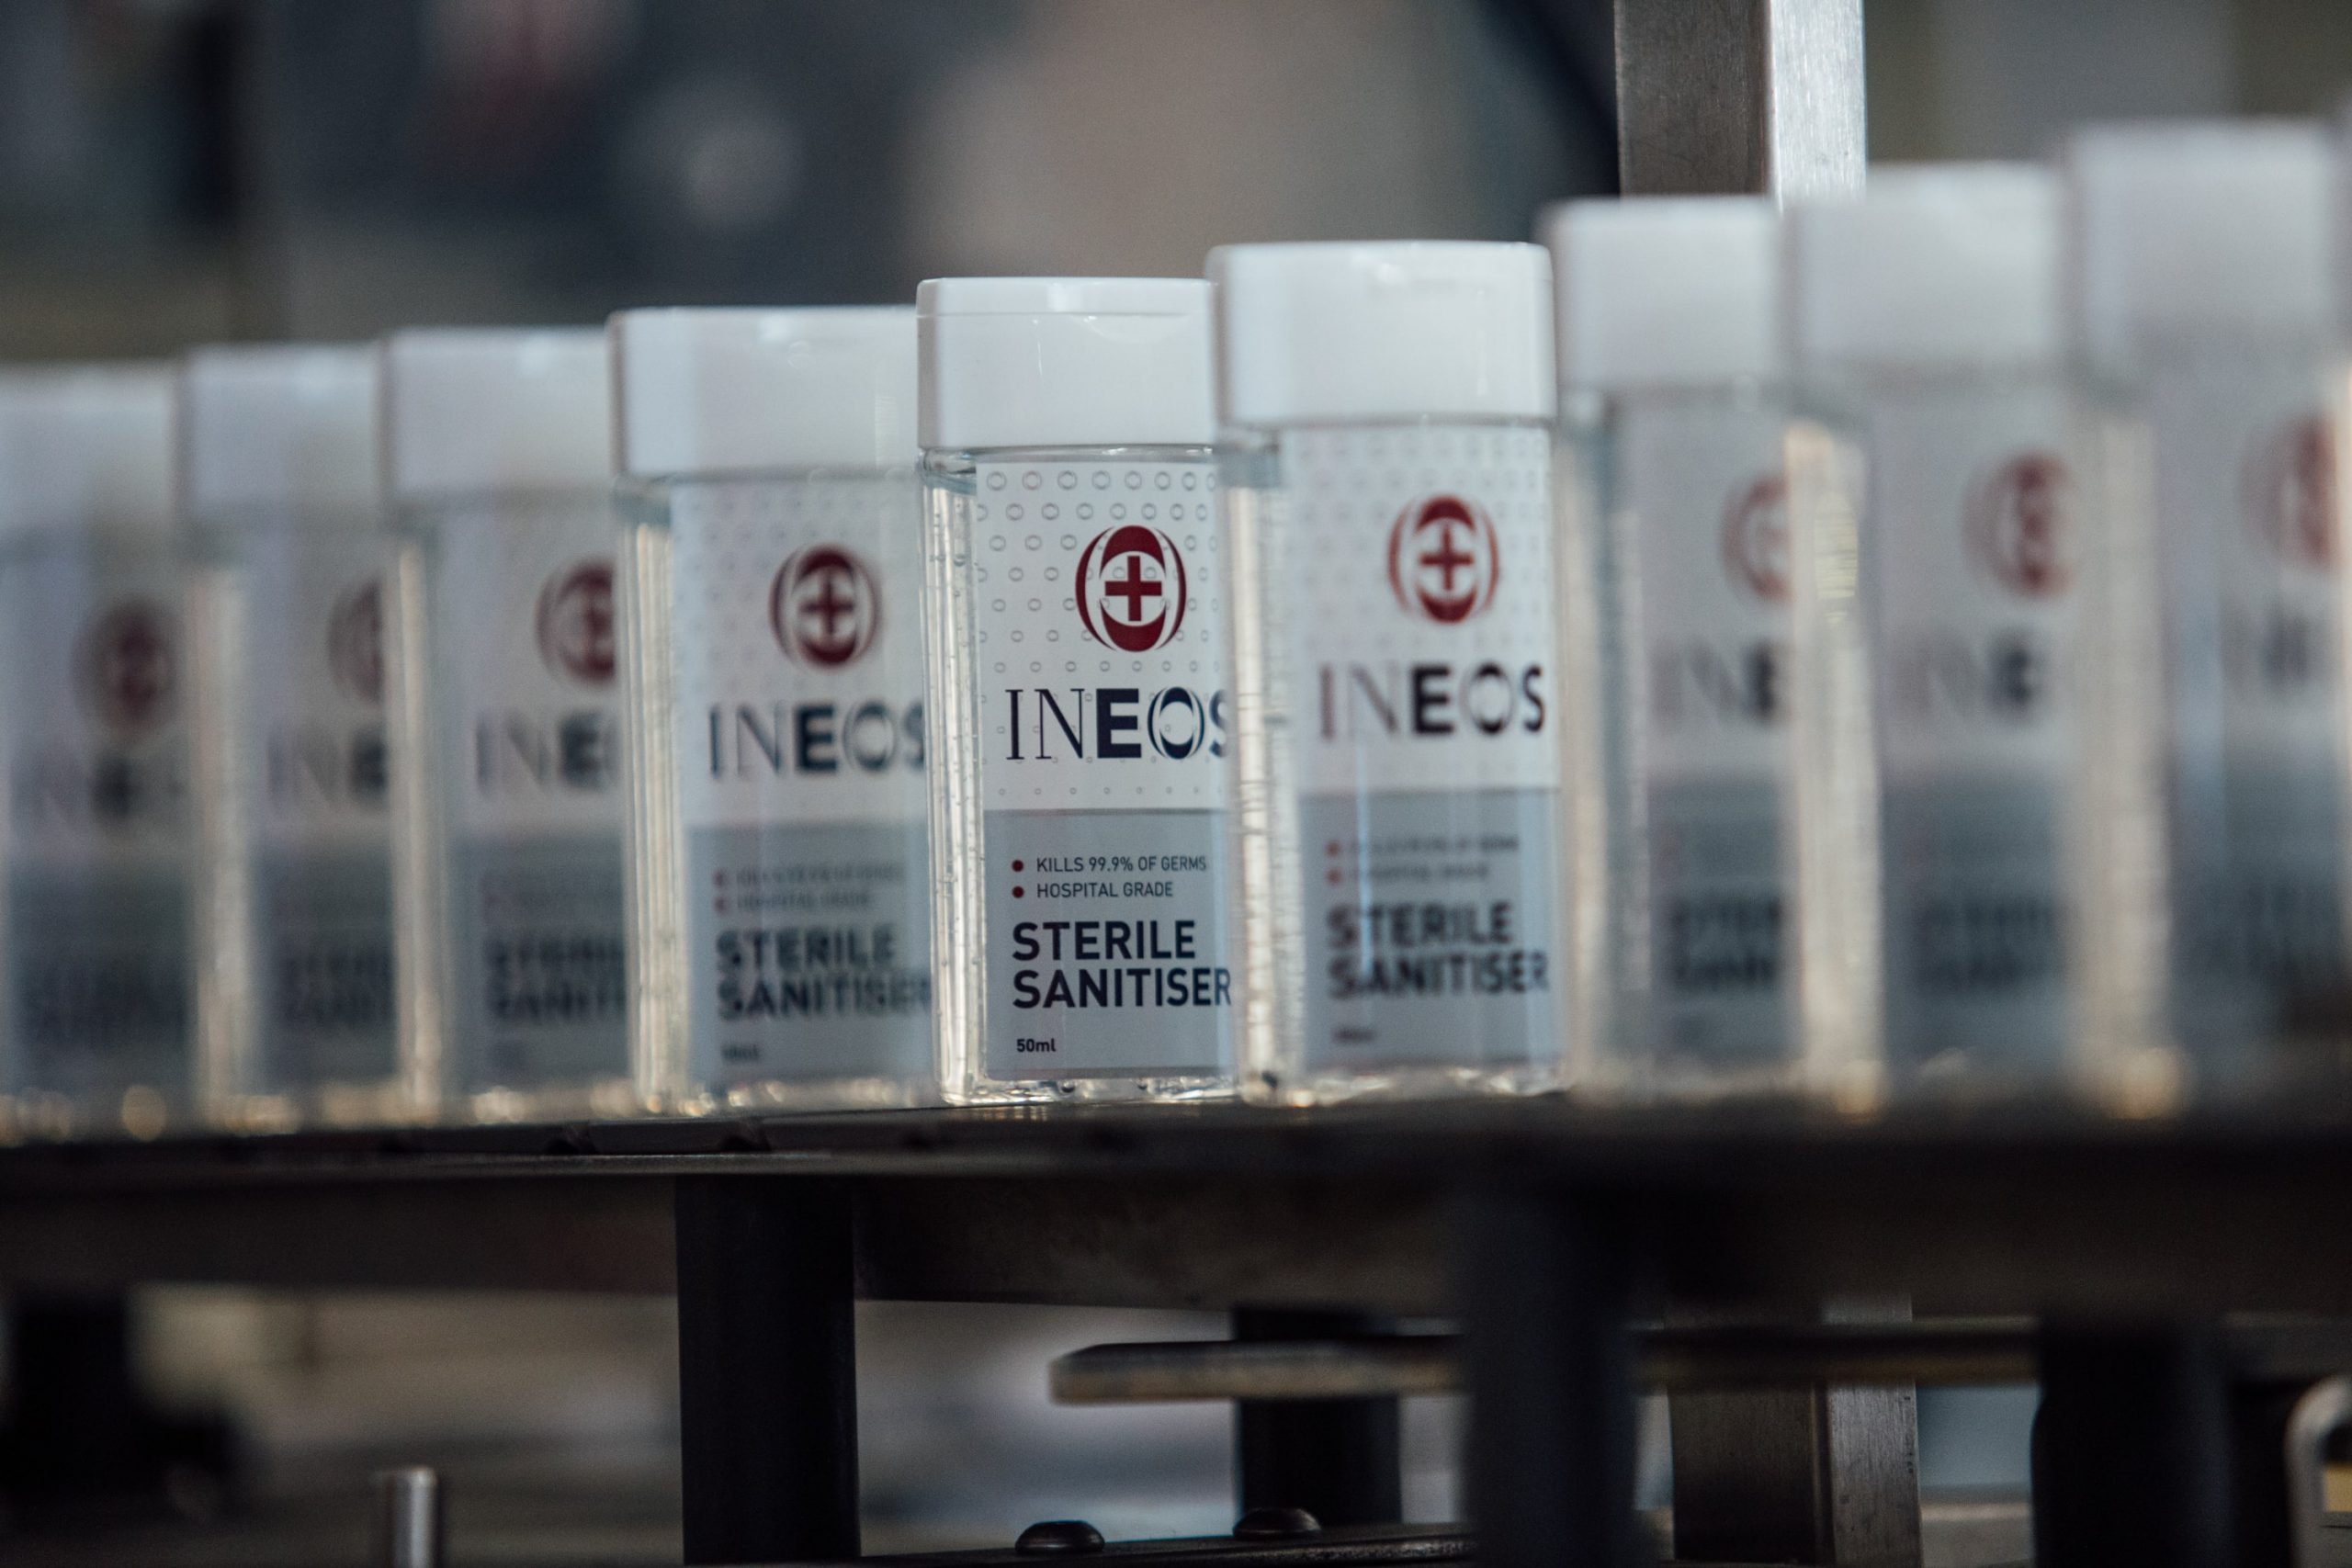 https://project-one.ineos.com/wp-content/uploads/2020/04/handgel-2-min-scaled.jpg